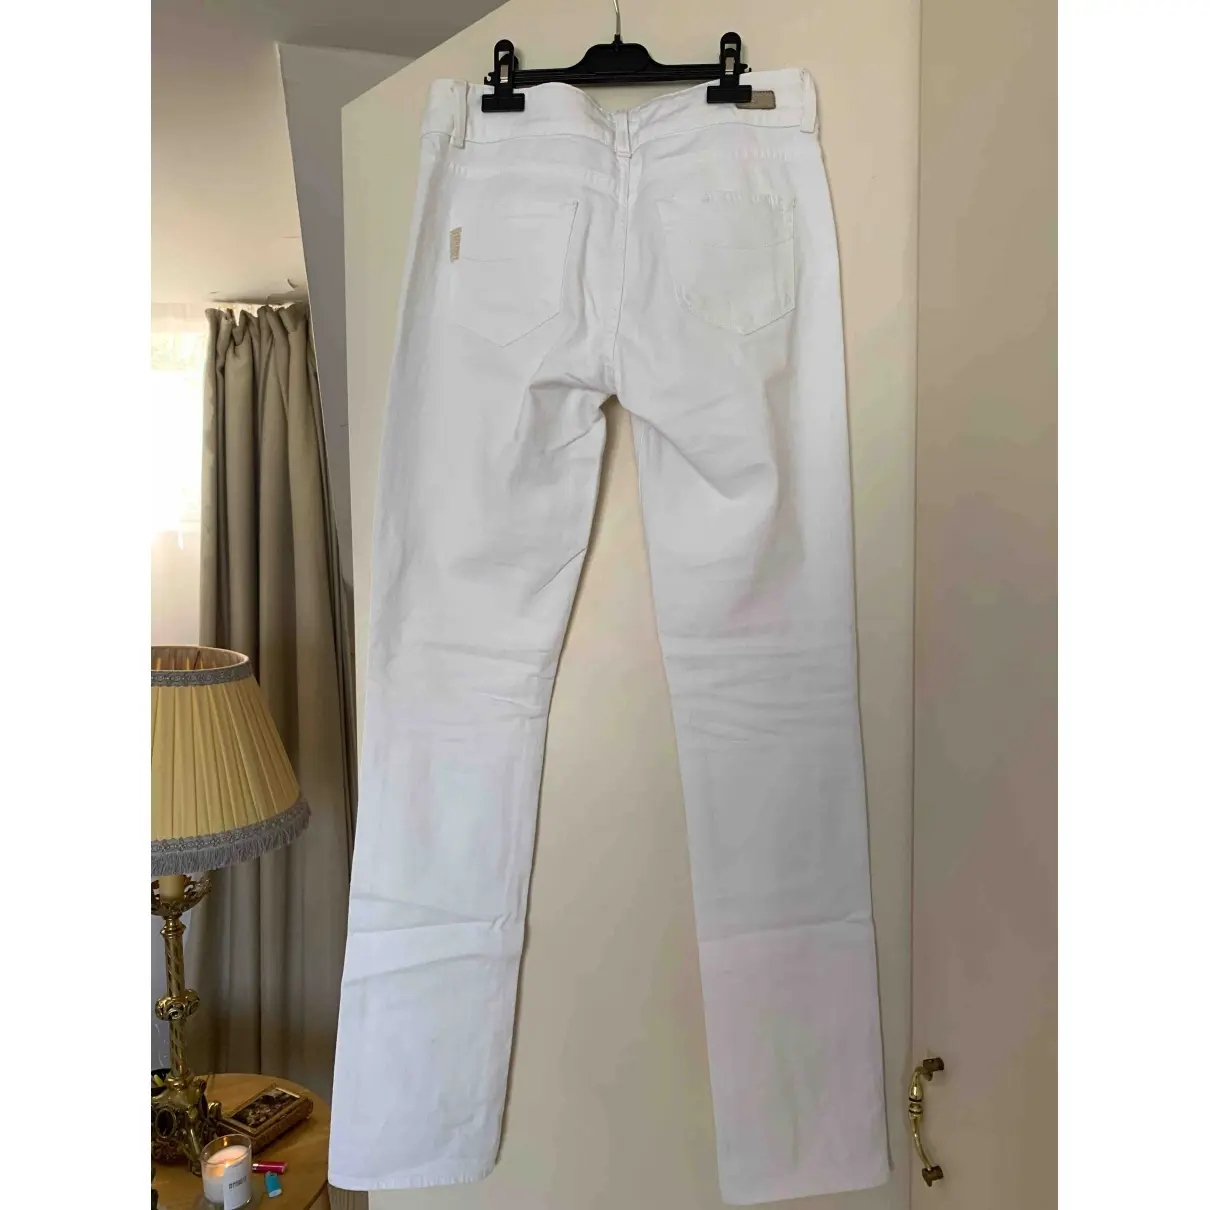 Paige Jeans Straight pants for sale